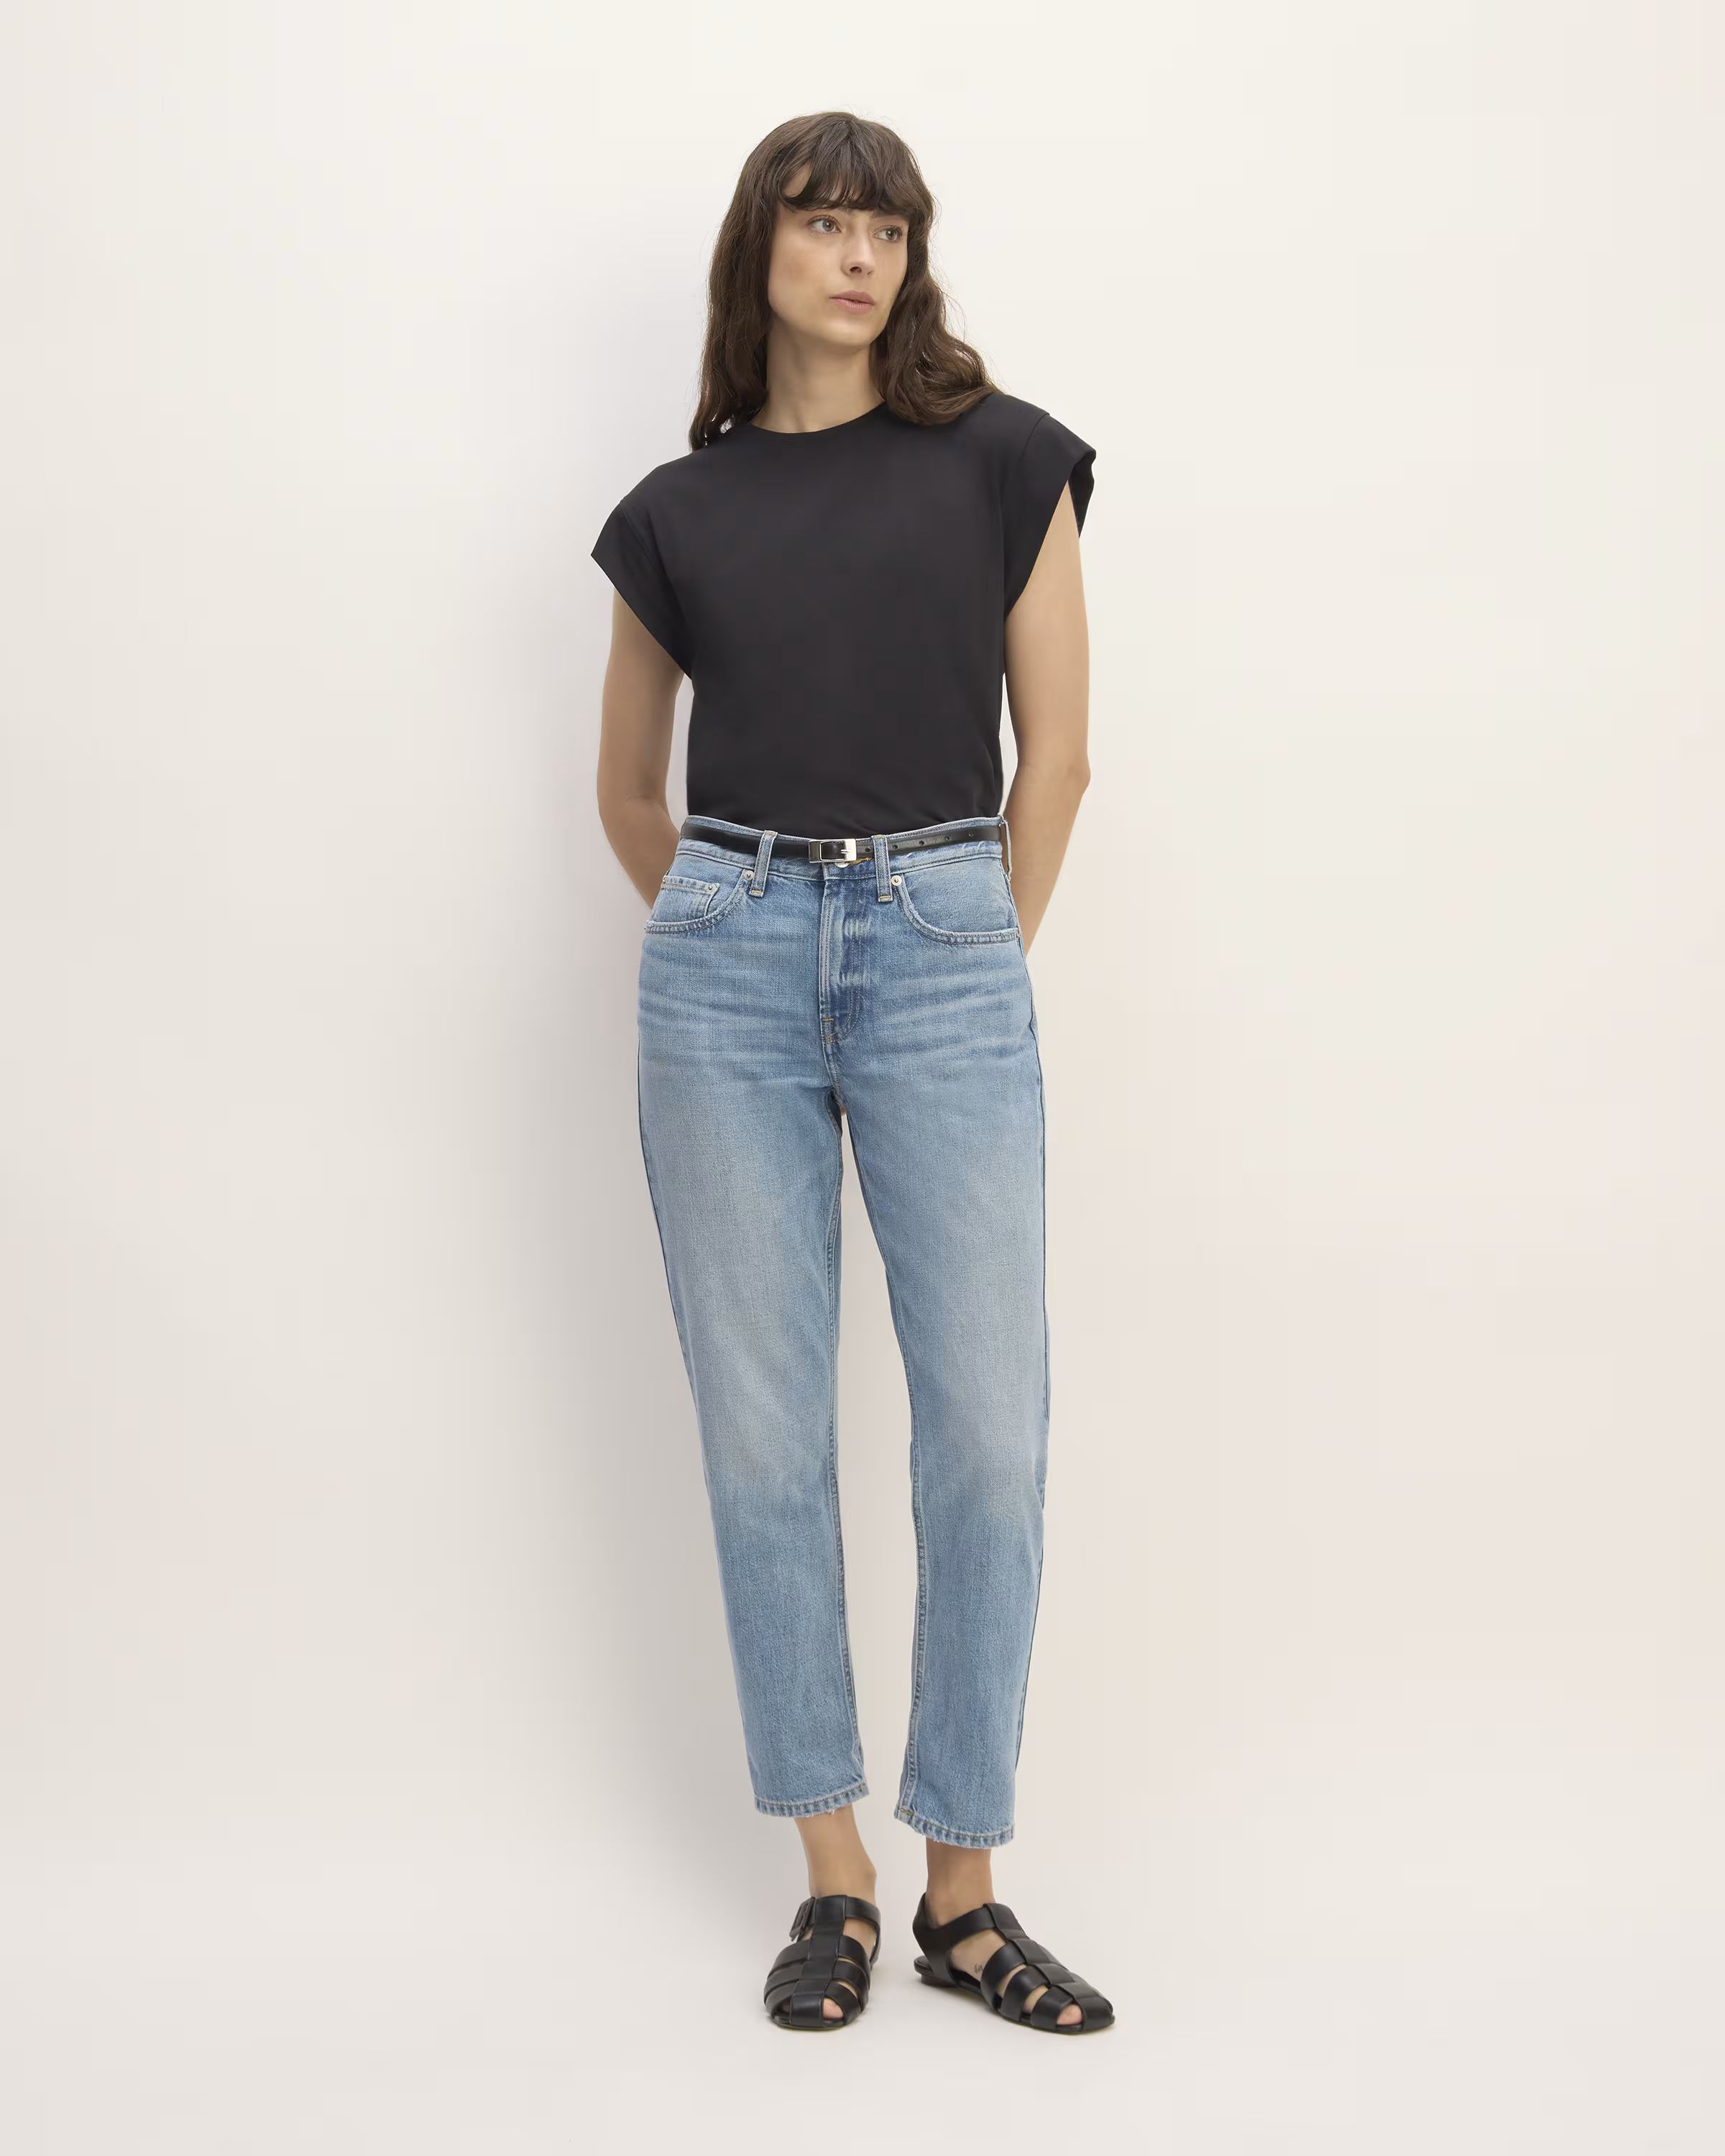 The Super-Soft Relaxed Jean€1174.3 (1069 Reviews)4.3 out of 5 stars. 1069 reviews Shop more Den... | Everlane